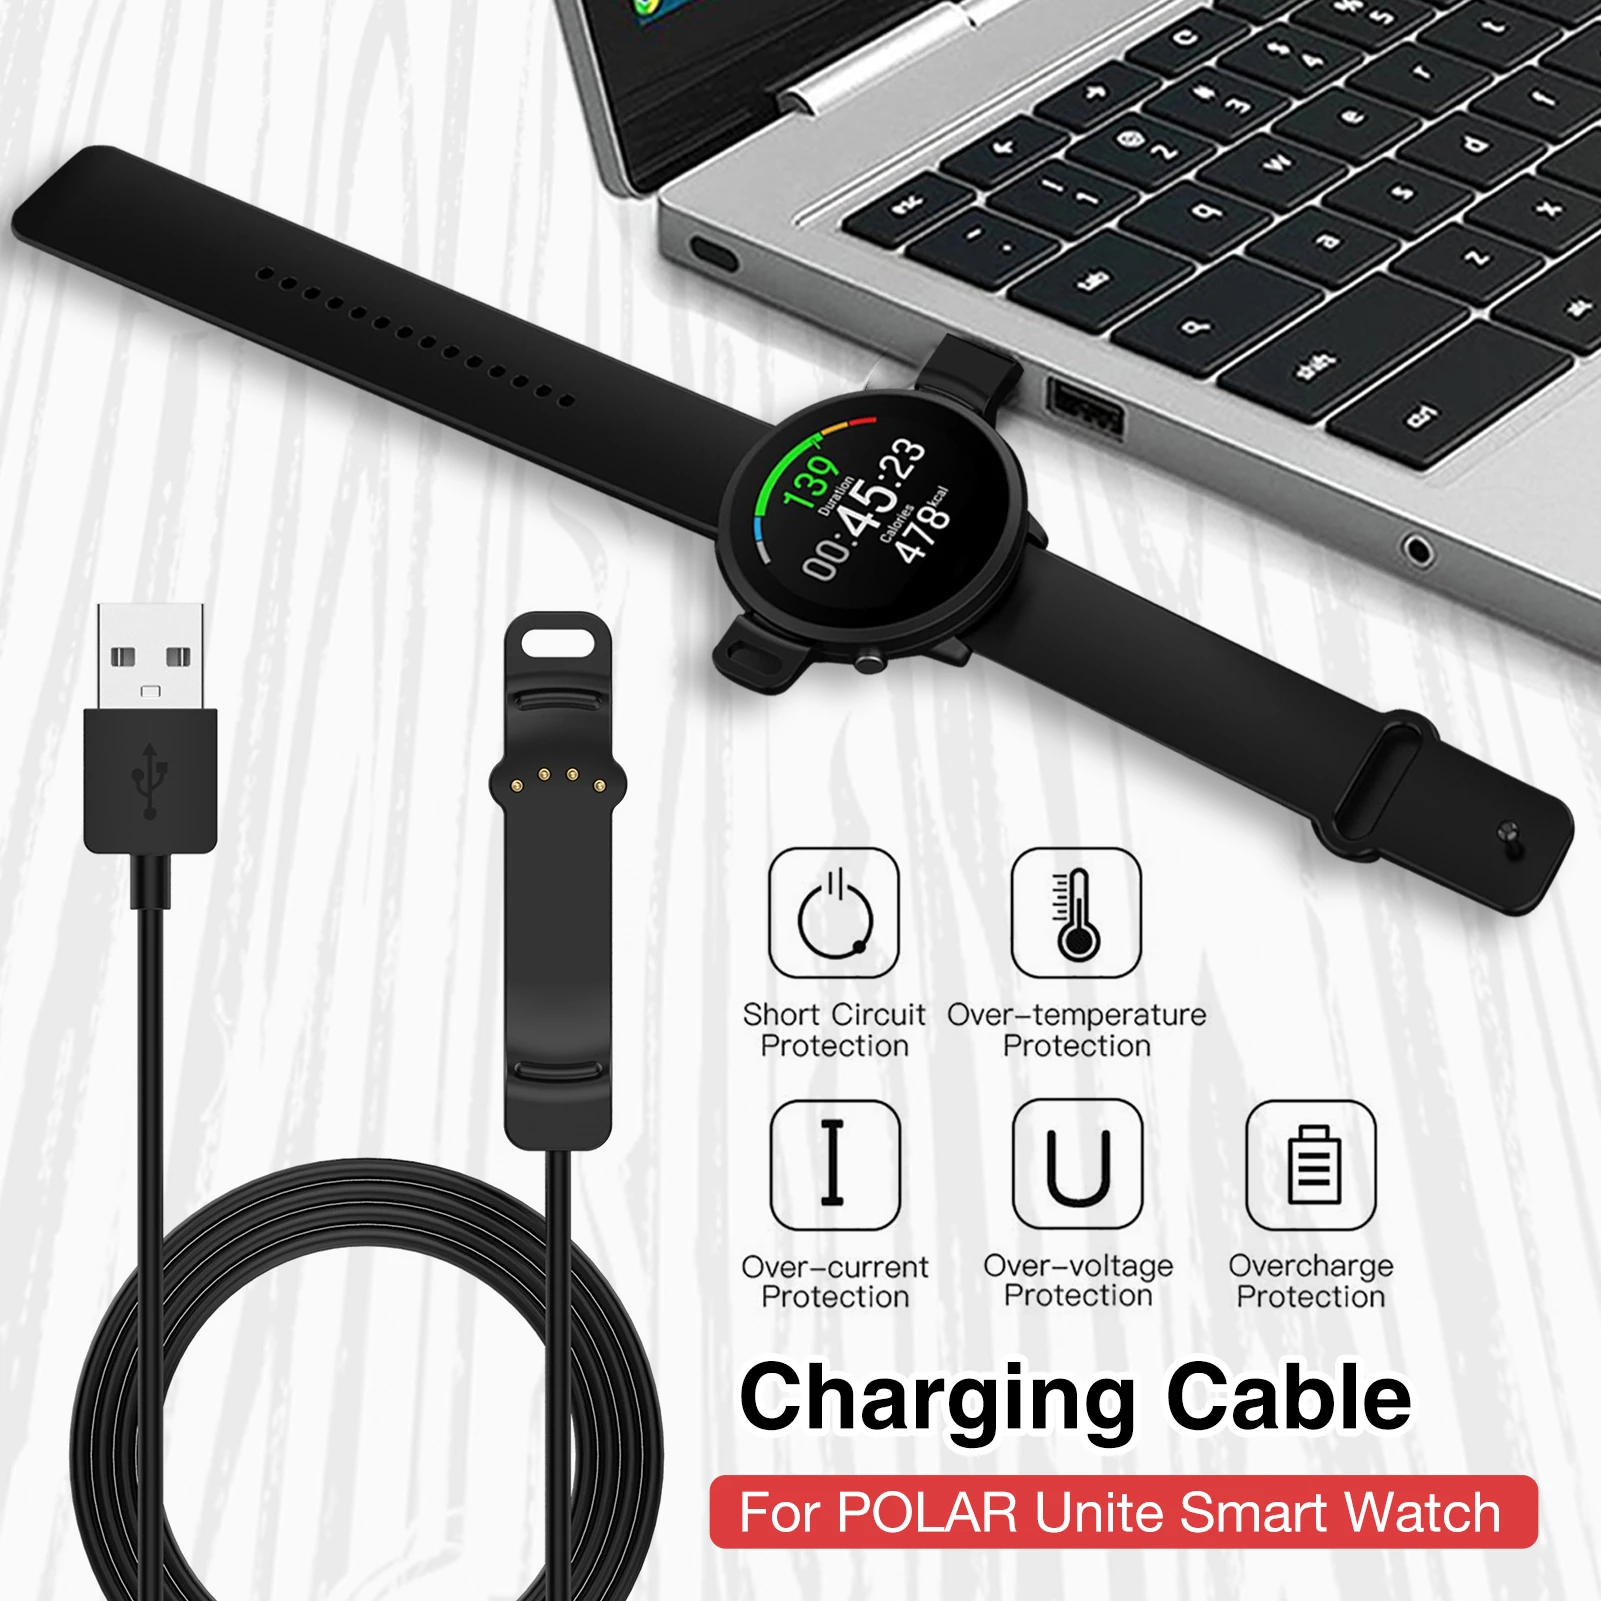 Smart Watch Charging Cable For POLAR Unite, Portable magnetic Charger Adapter USB Charging Dock Smartwatch Accessories|Smart Accessories| - AliExpress